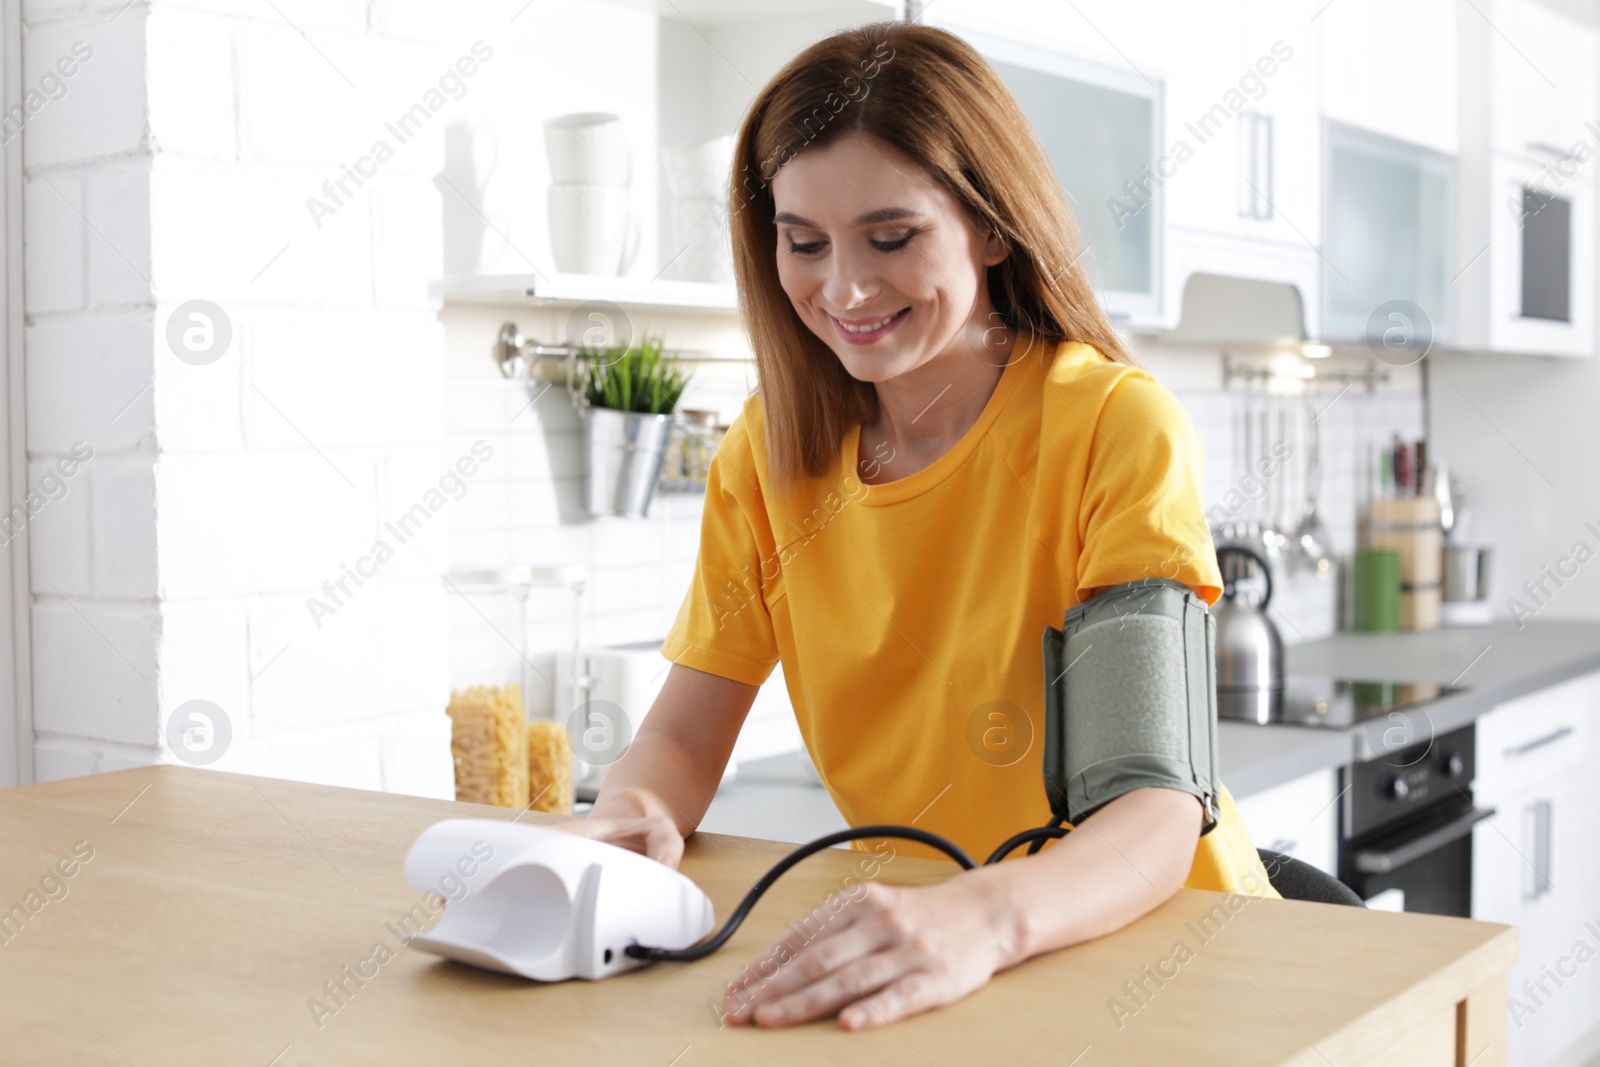 Photo of Woman checking blood pressure with sphygmomanometer at table indoors. Cardiology concept